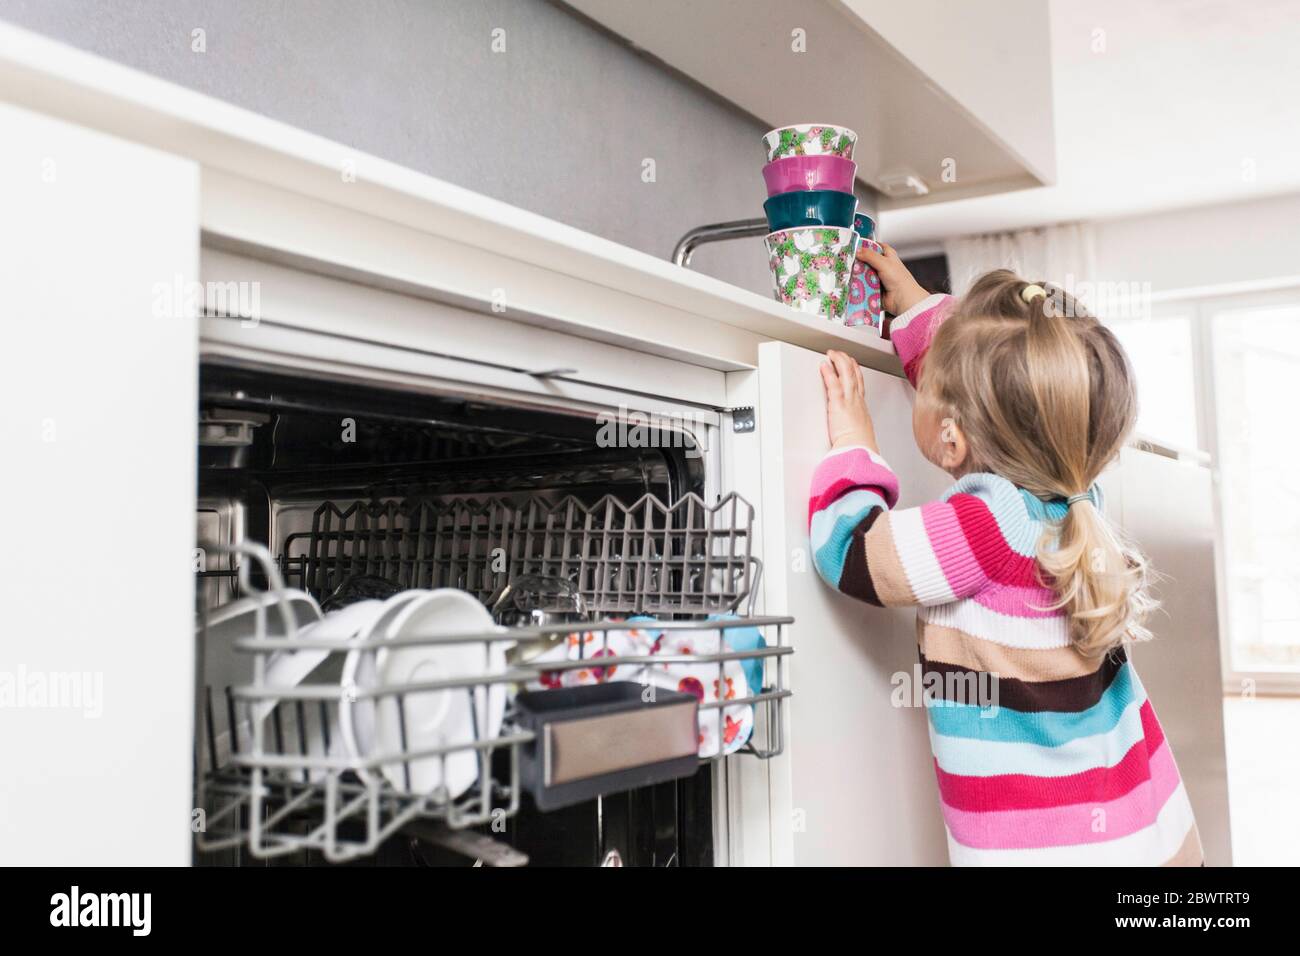 Daughter clearing the dishwasher Stock Photo